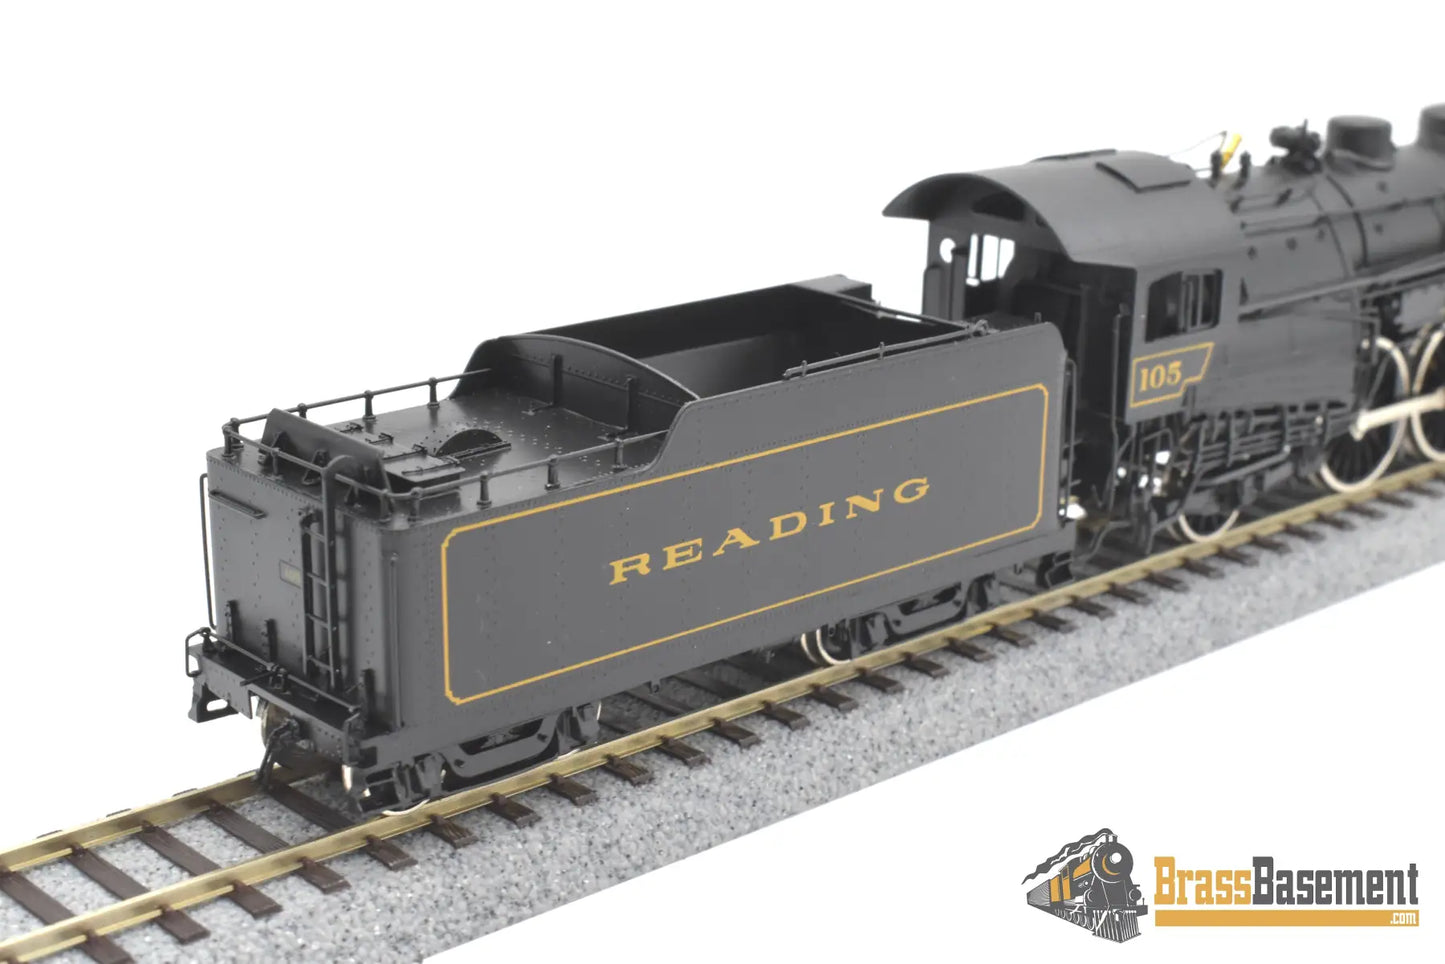 Ho Brass - Omi 1565.1 Reading 4 - 6 - 2 Pacific G1Sa Unstreamlined #105 Fp Steam